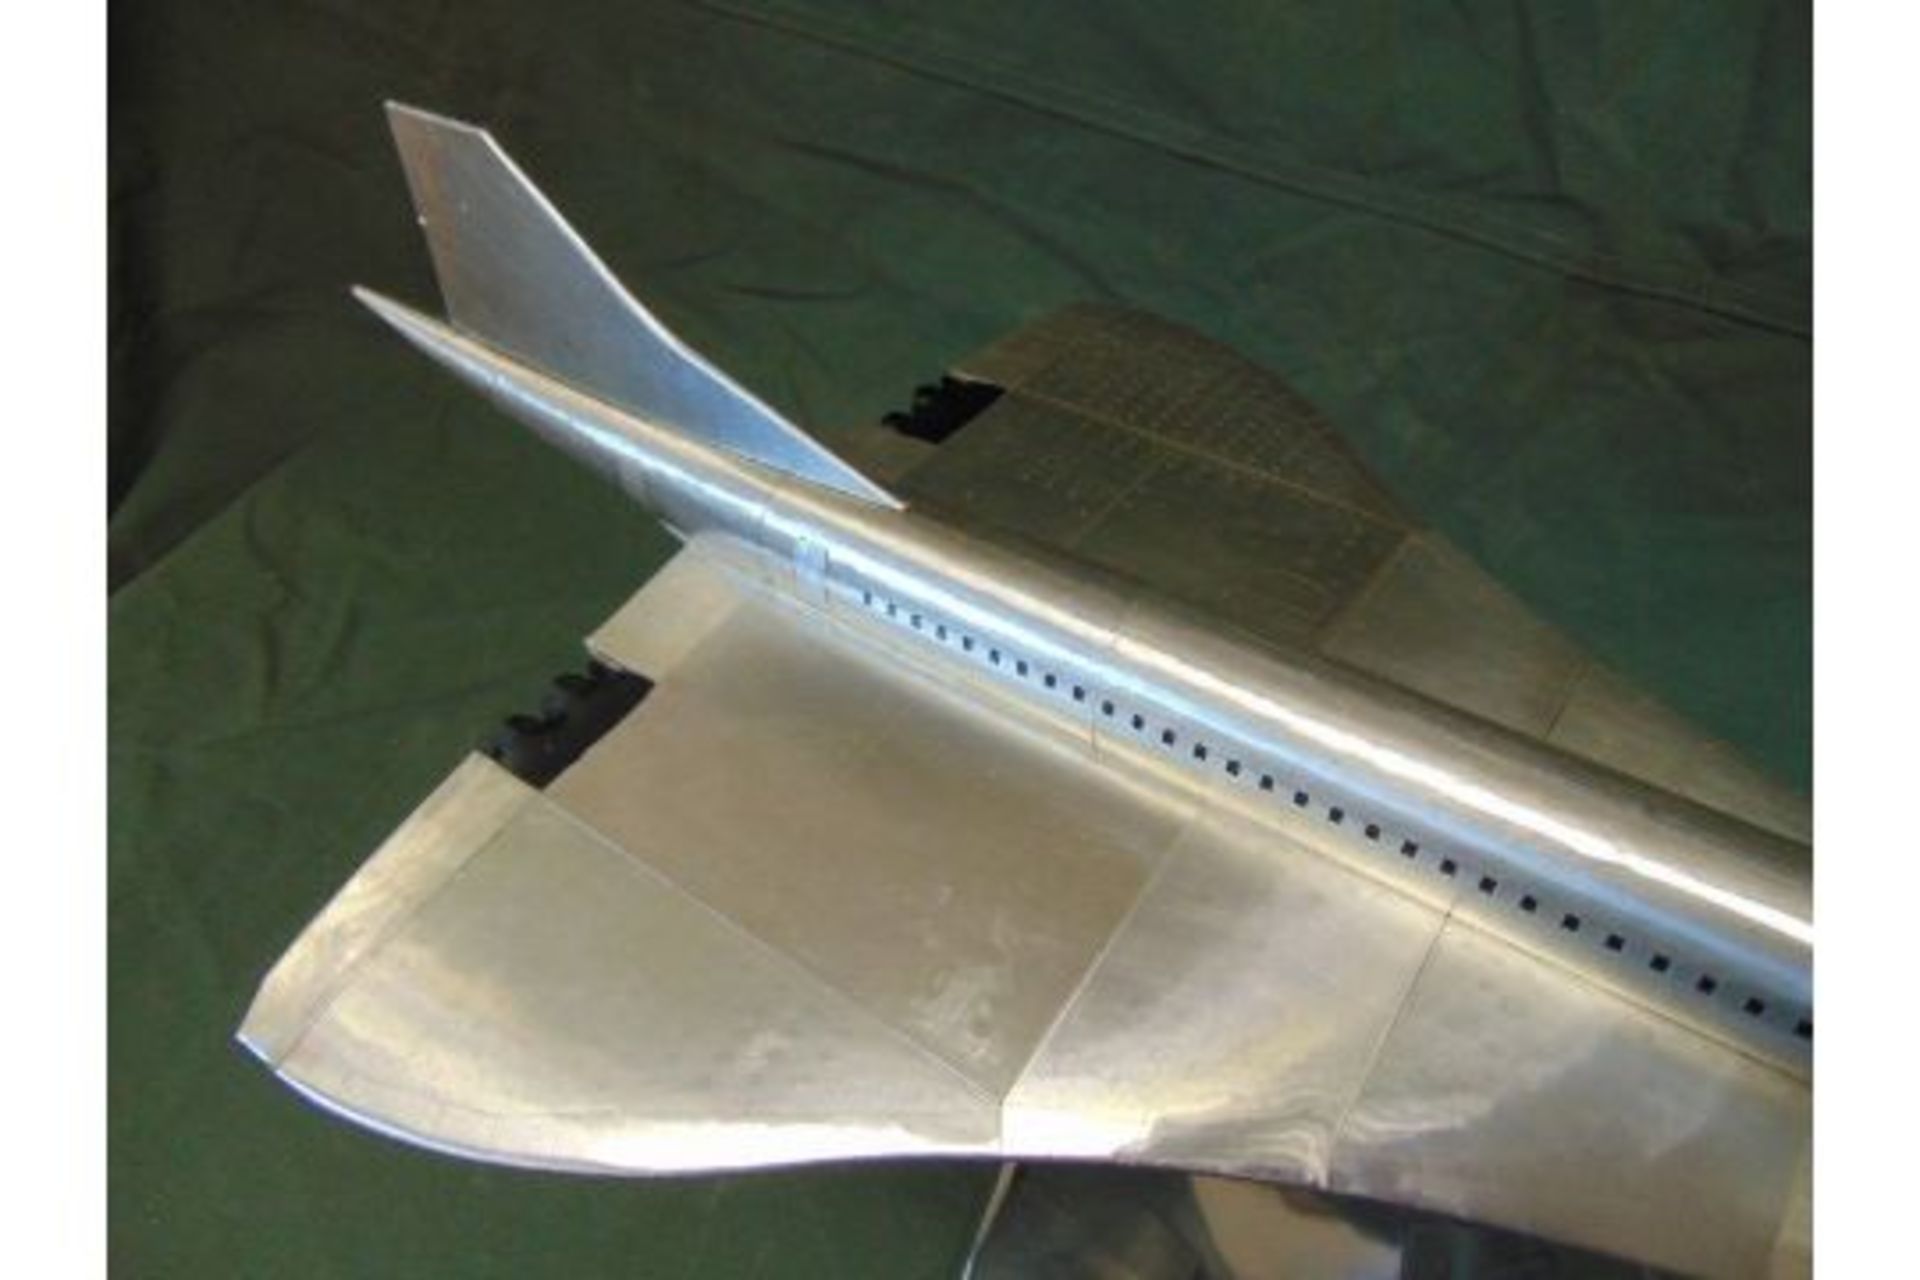 NEW JUST LANDED Large Aluminium Concorde Model - Image 8 of 14